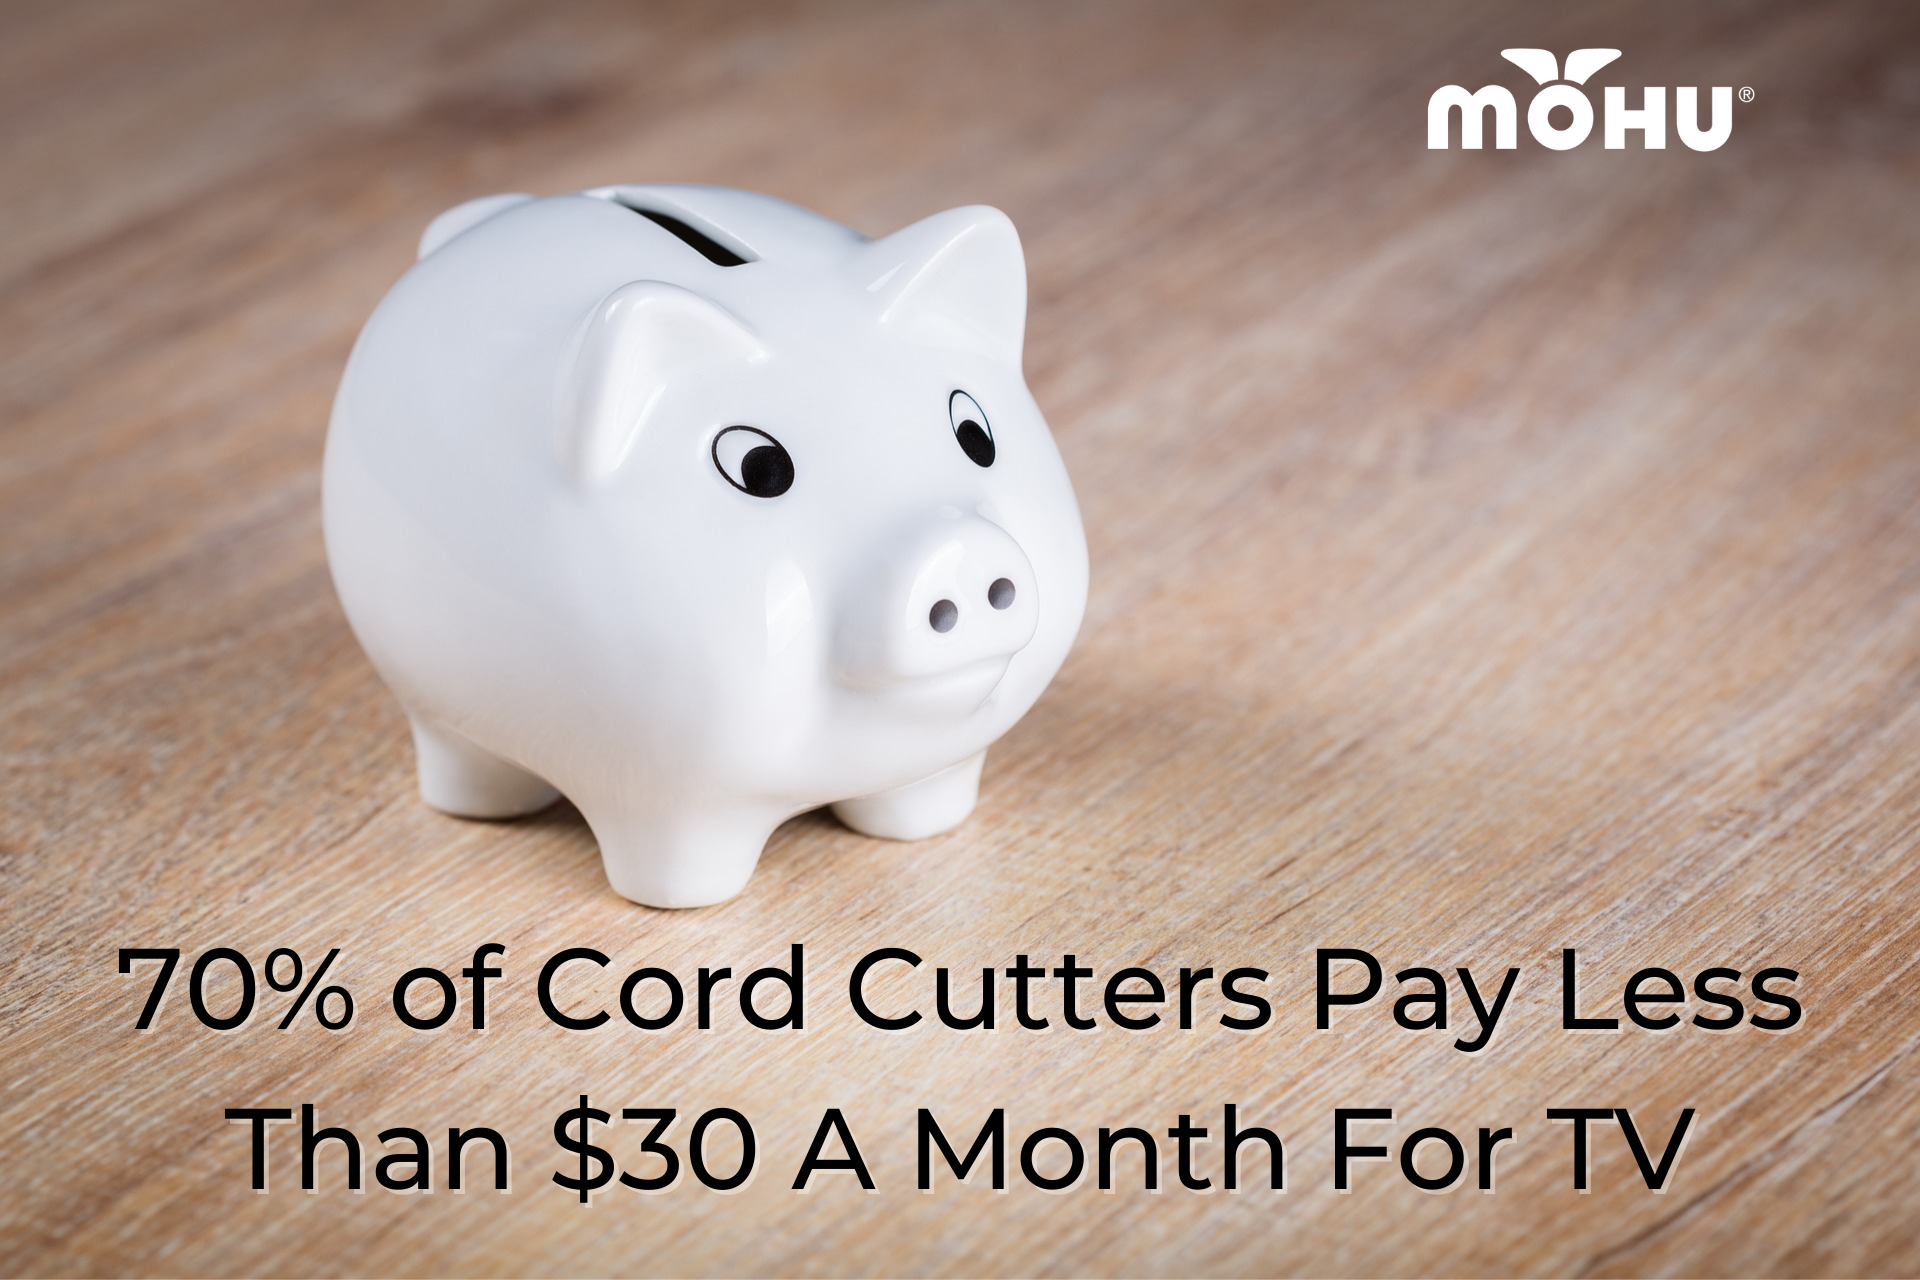 Piggy bank on table, 70% of Cord Cutters Pay Less Than $30 A Month For TV, Mohu logo